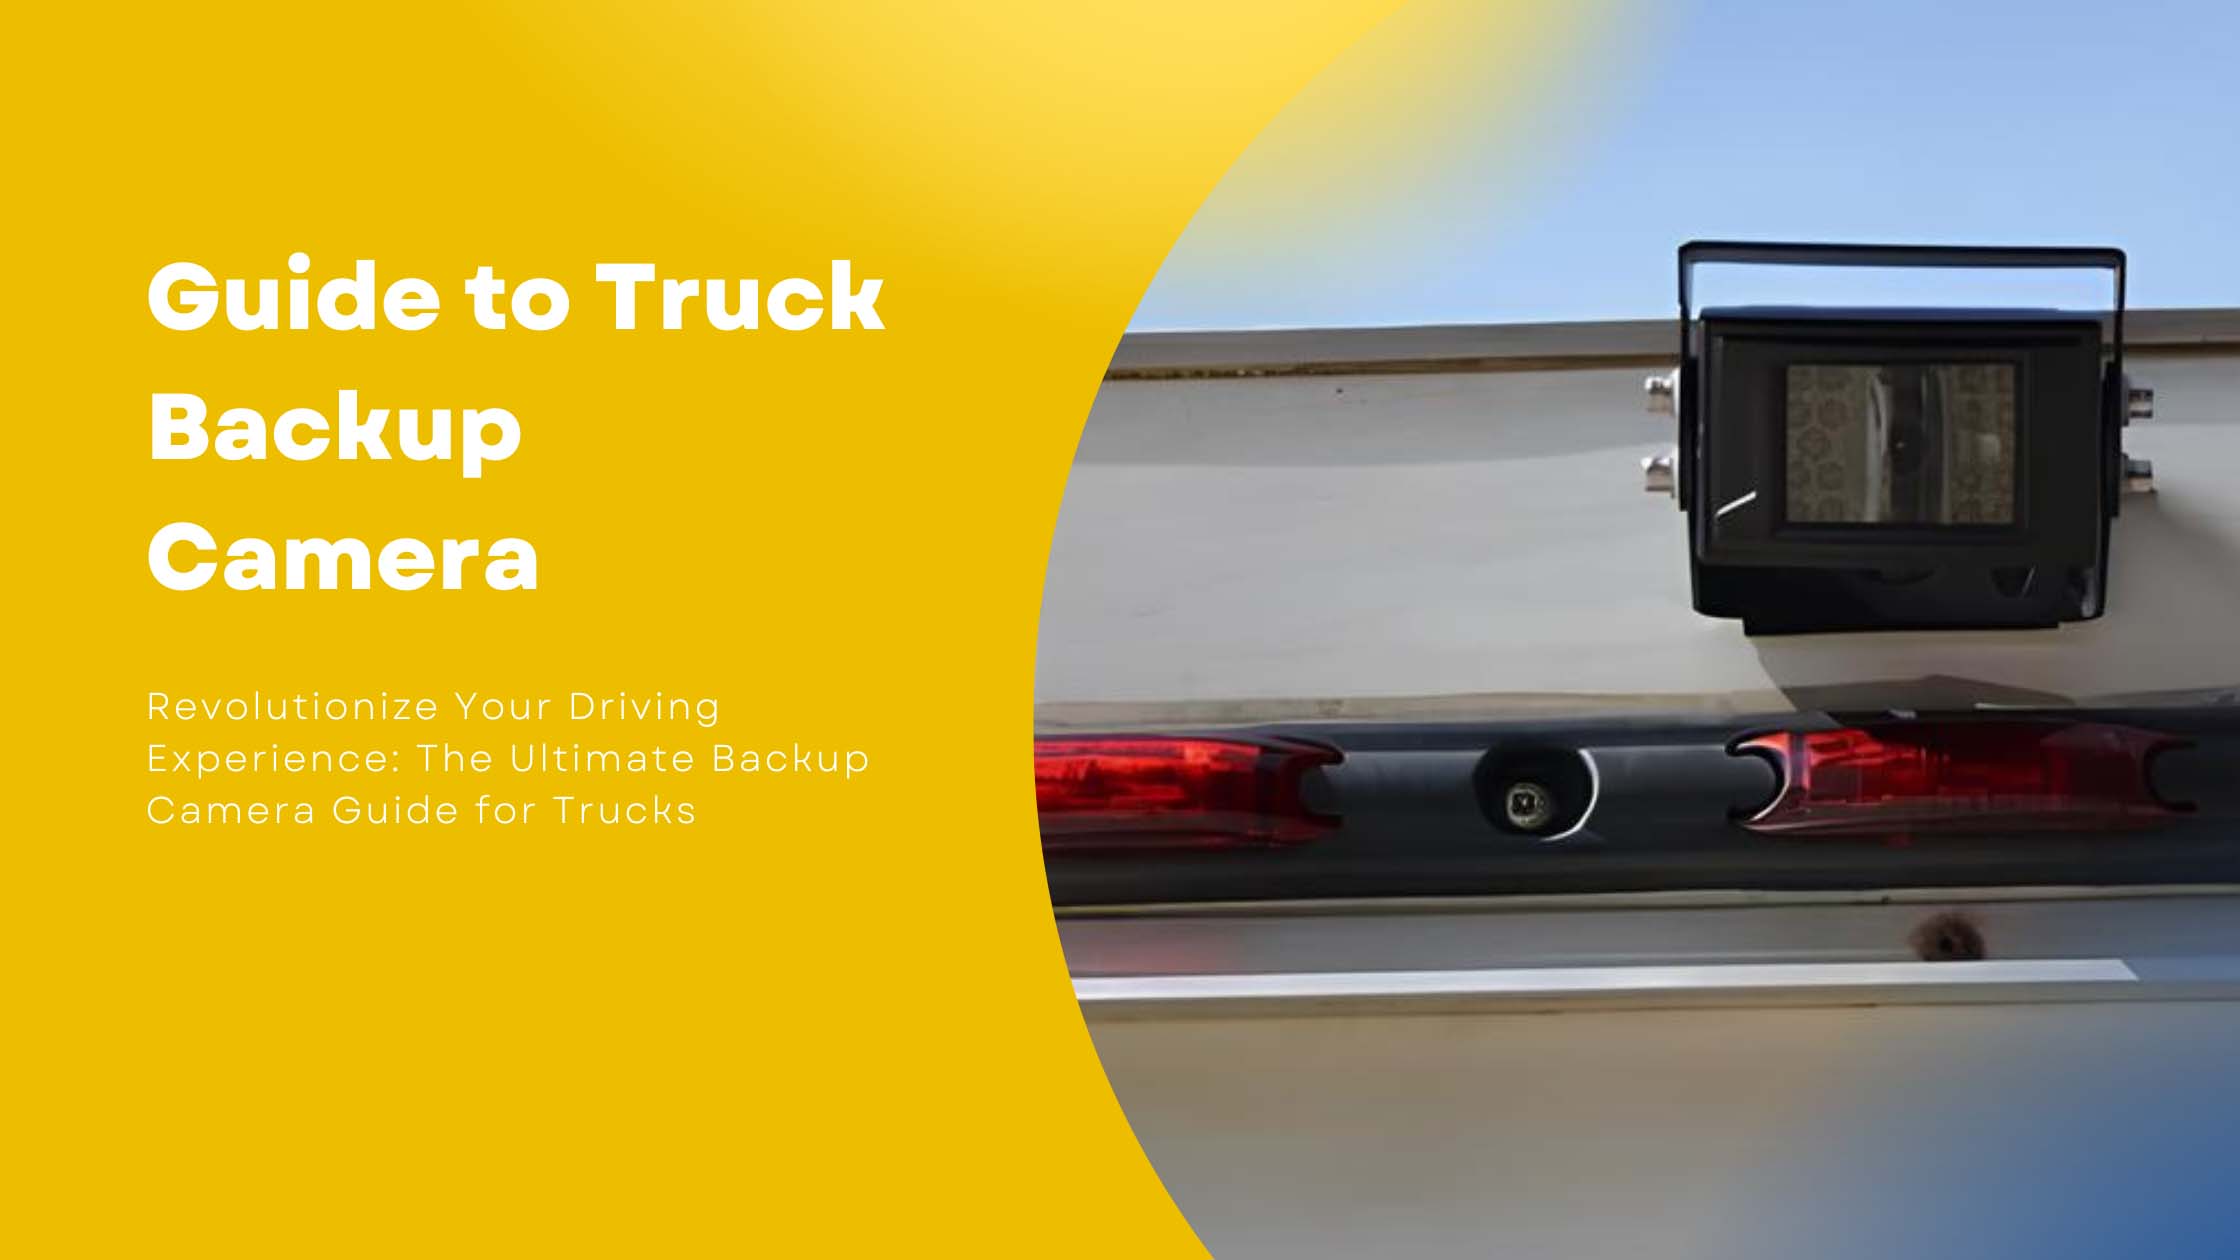 Guide to Truck Backup Camera